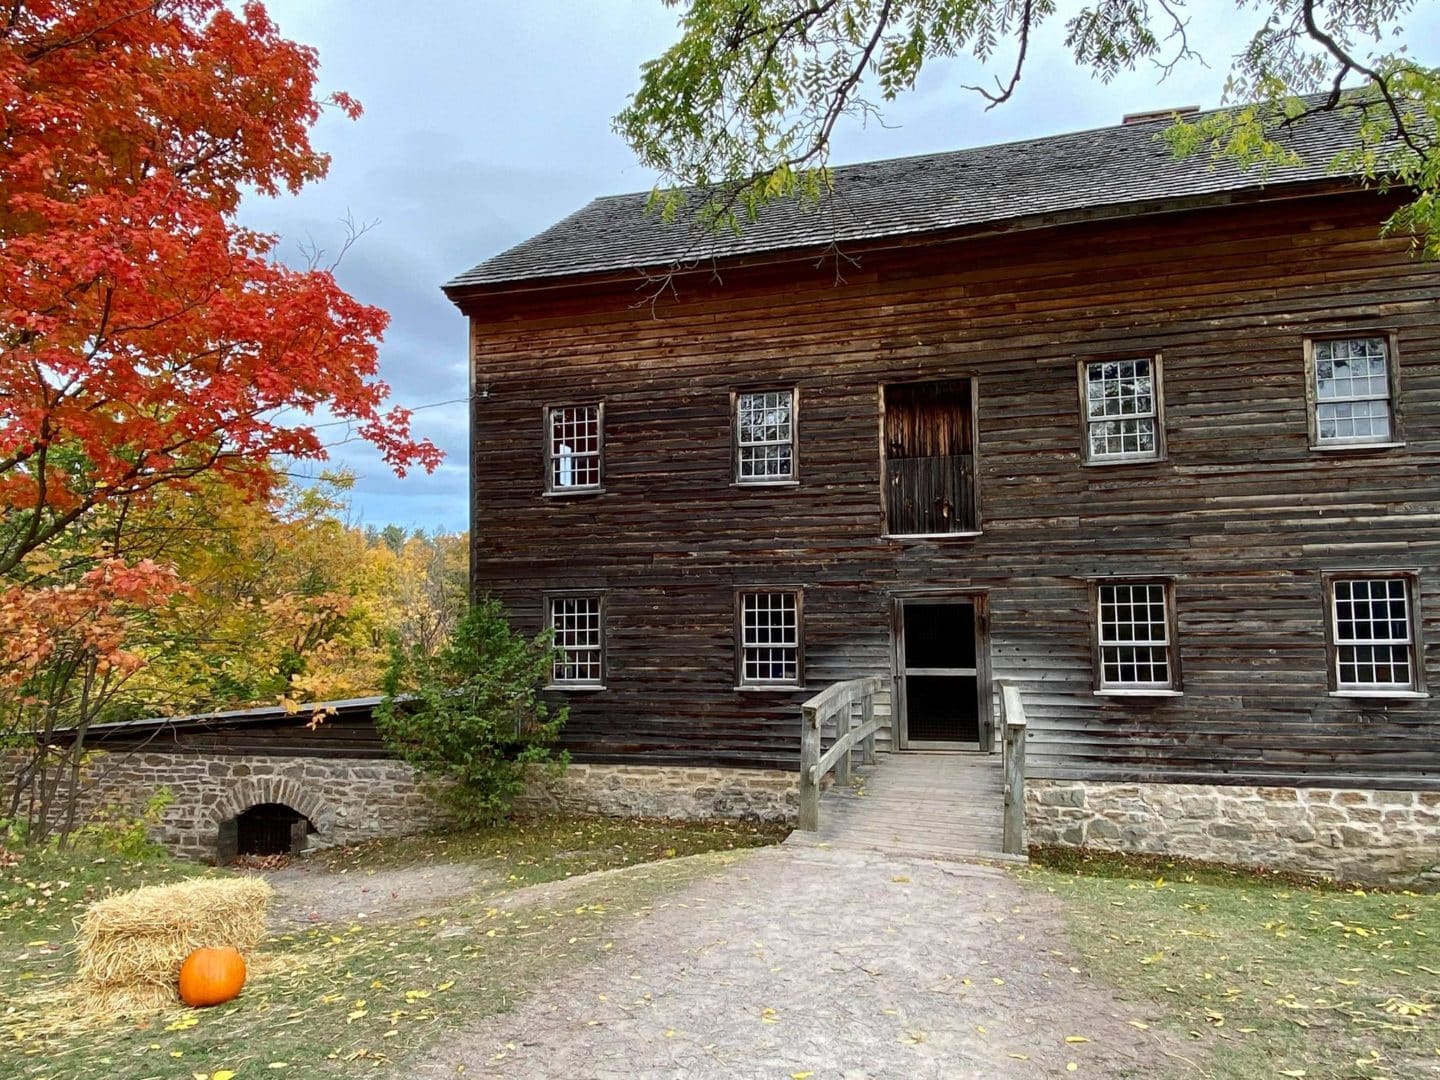 Gristmill during the fall